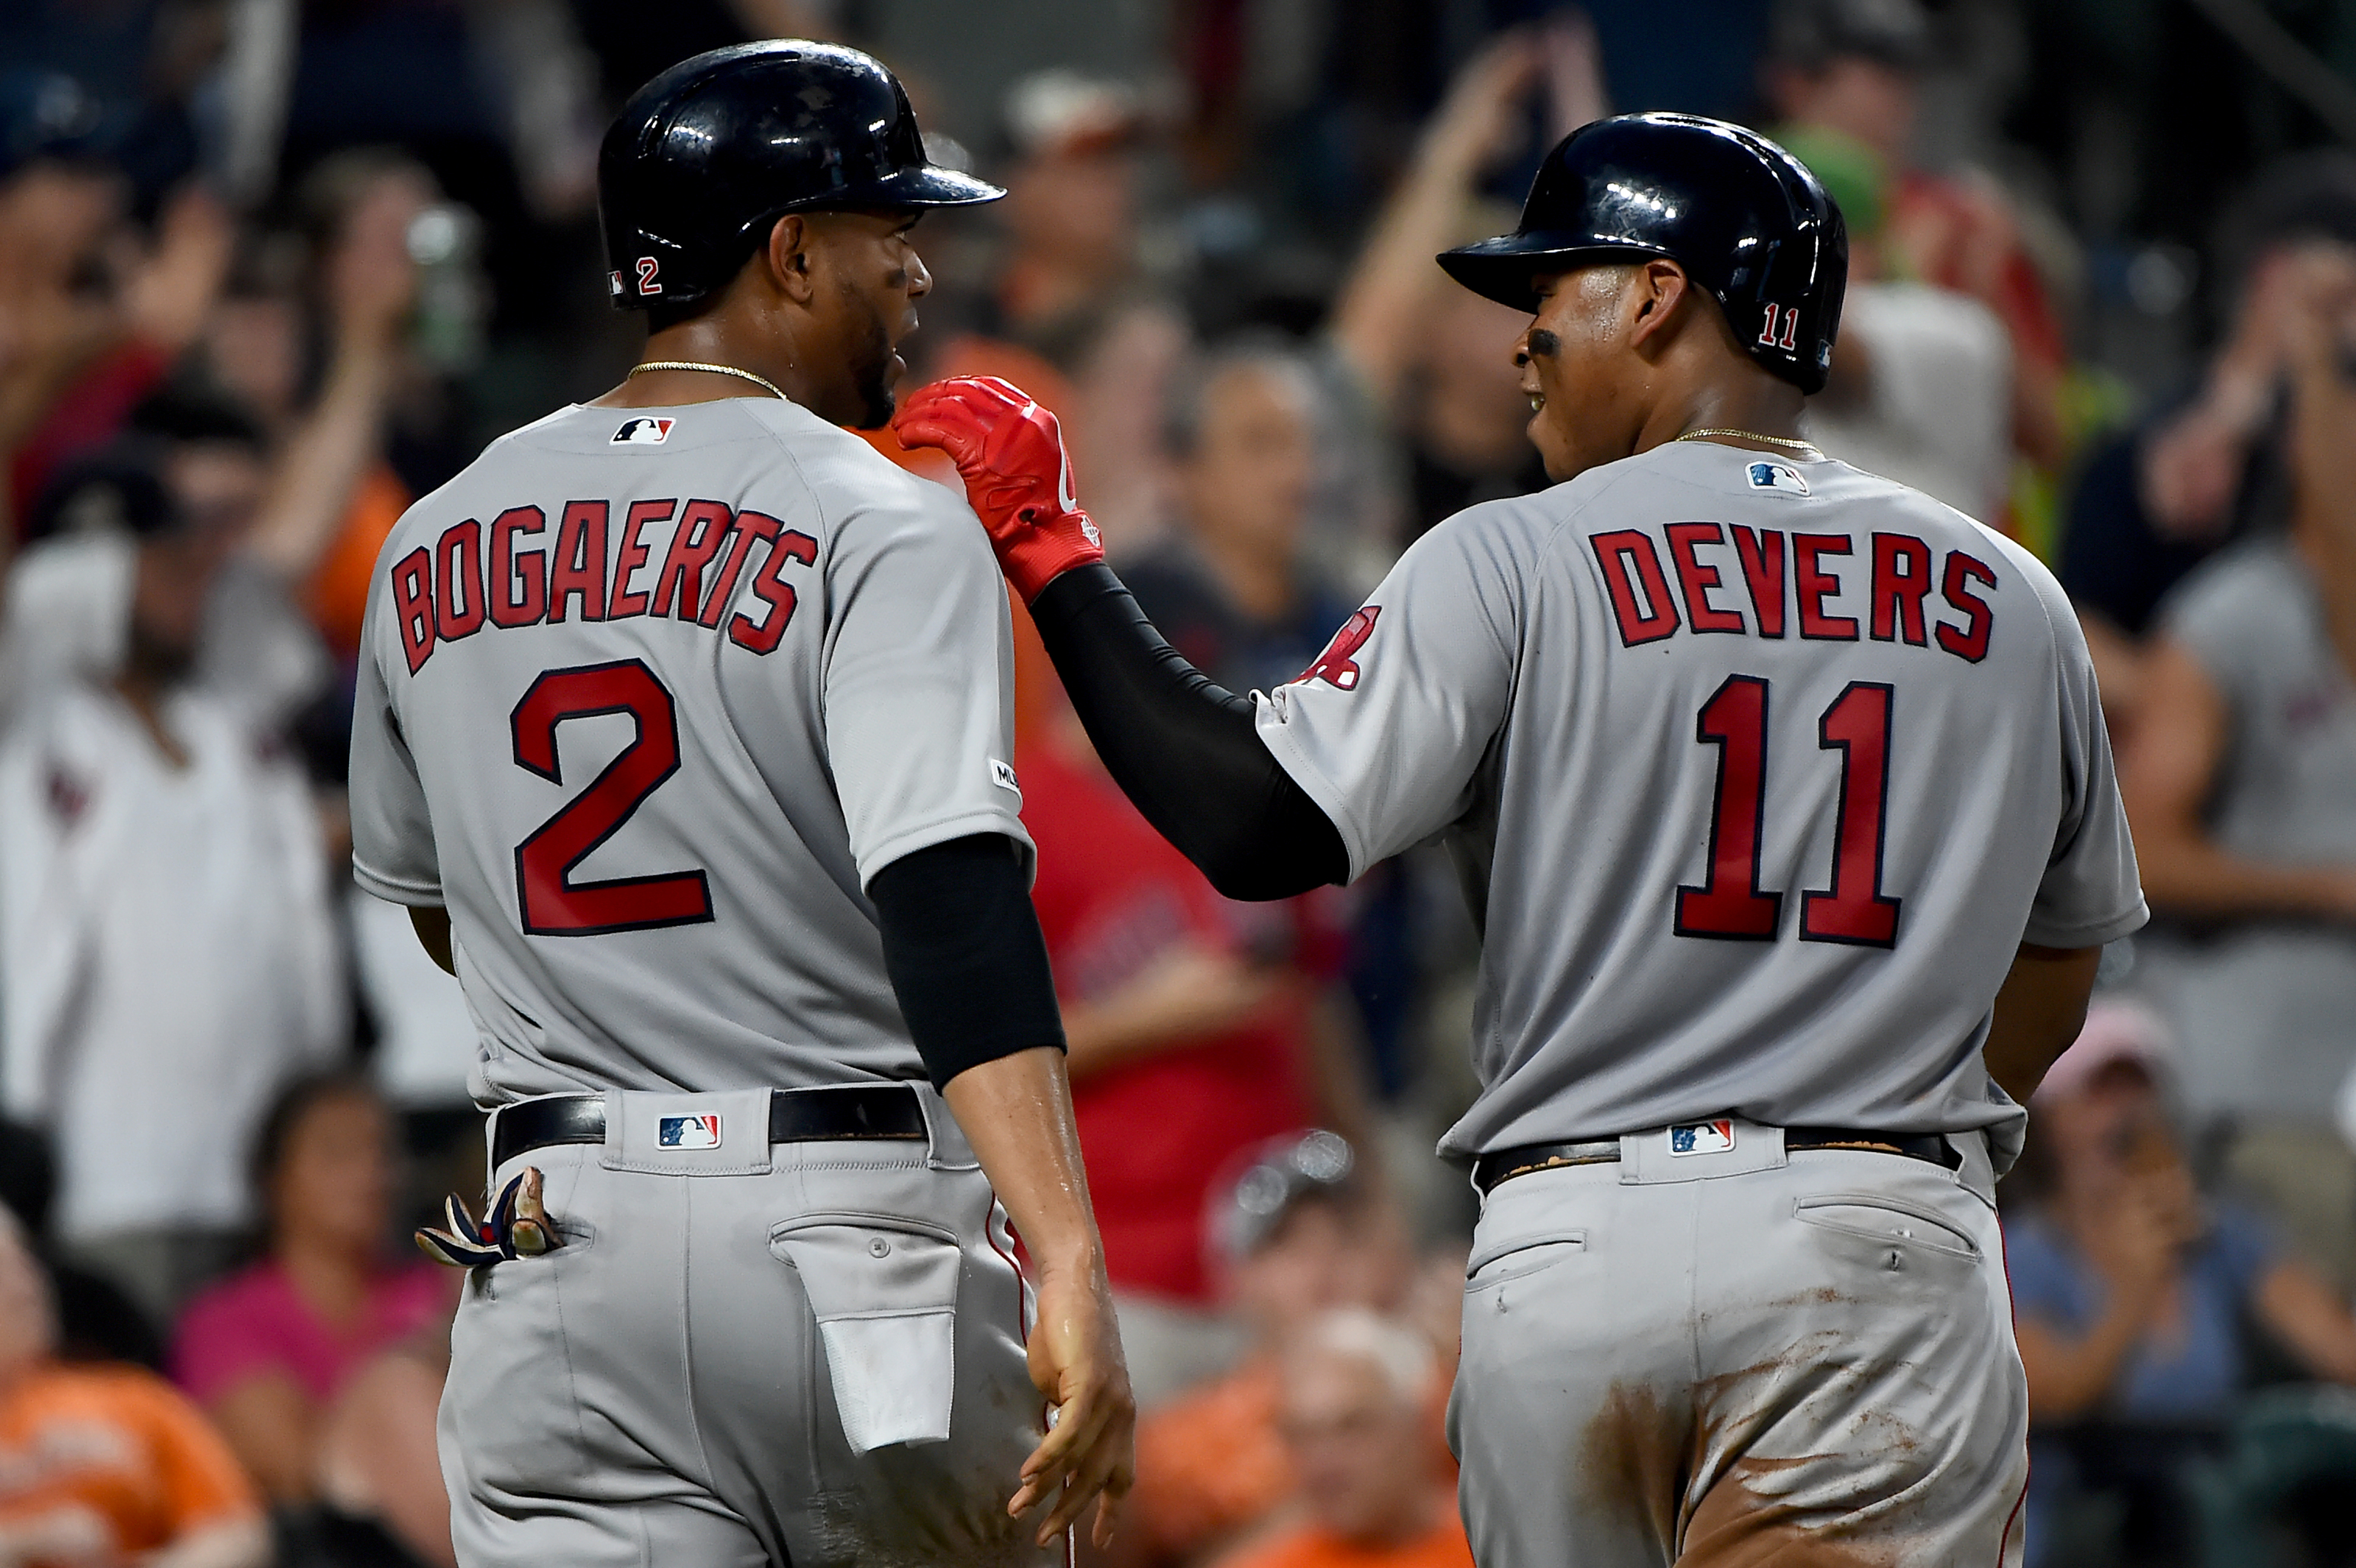 BOSTON RED SOX 2021 PREVIEW: ALTERNATIVE FANTASY MLB OUTLOOK